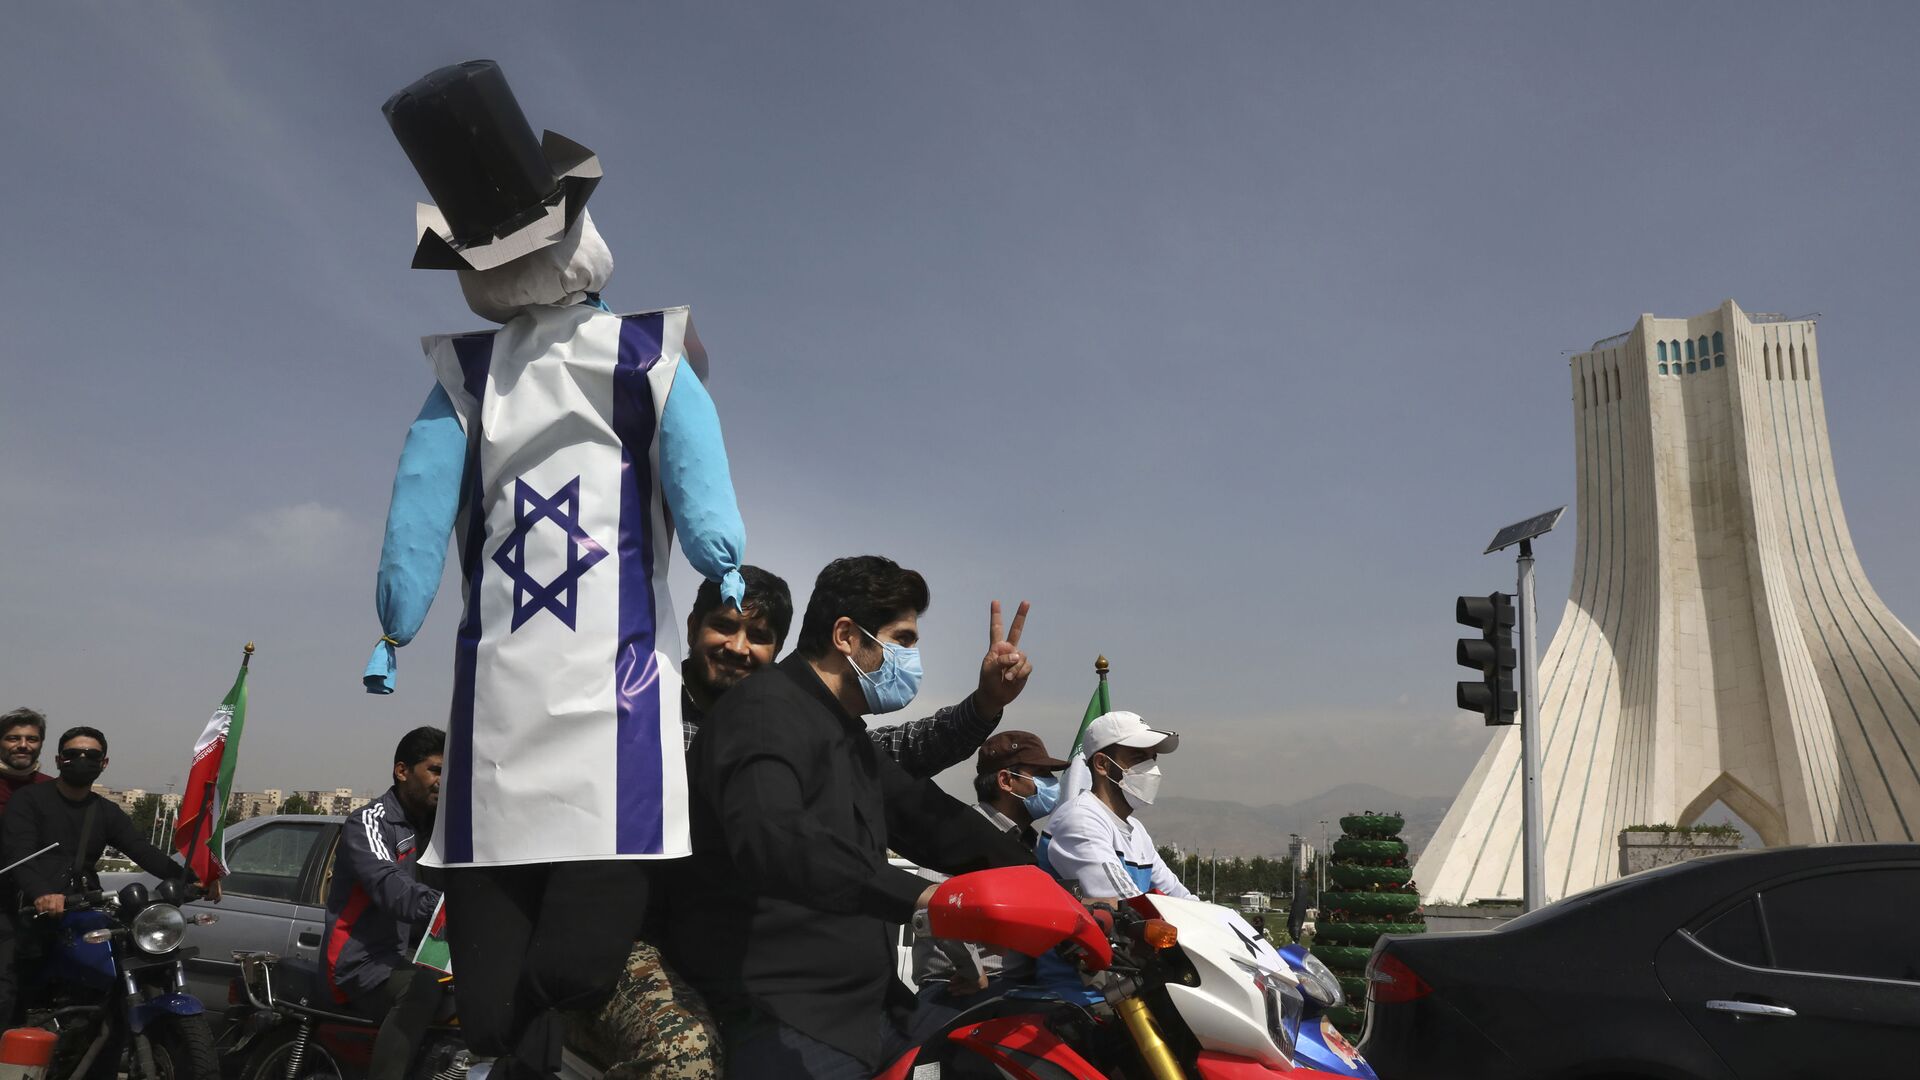 A demonstrator on a motorcycle holds an effigy representing Israel and the United States  during the annual Al-Quds, or Jerusalem, Day rally, with the Azadi (Freedom) monument tower seen at right, in Tehran, Iran, Friday, May 7, 2021. - Sputnik International, 1920, 10.09.2021